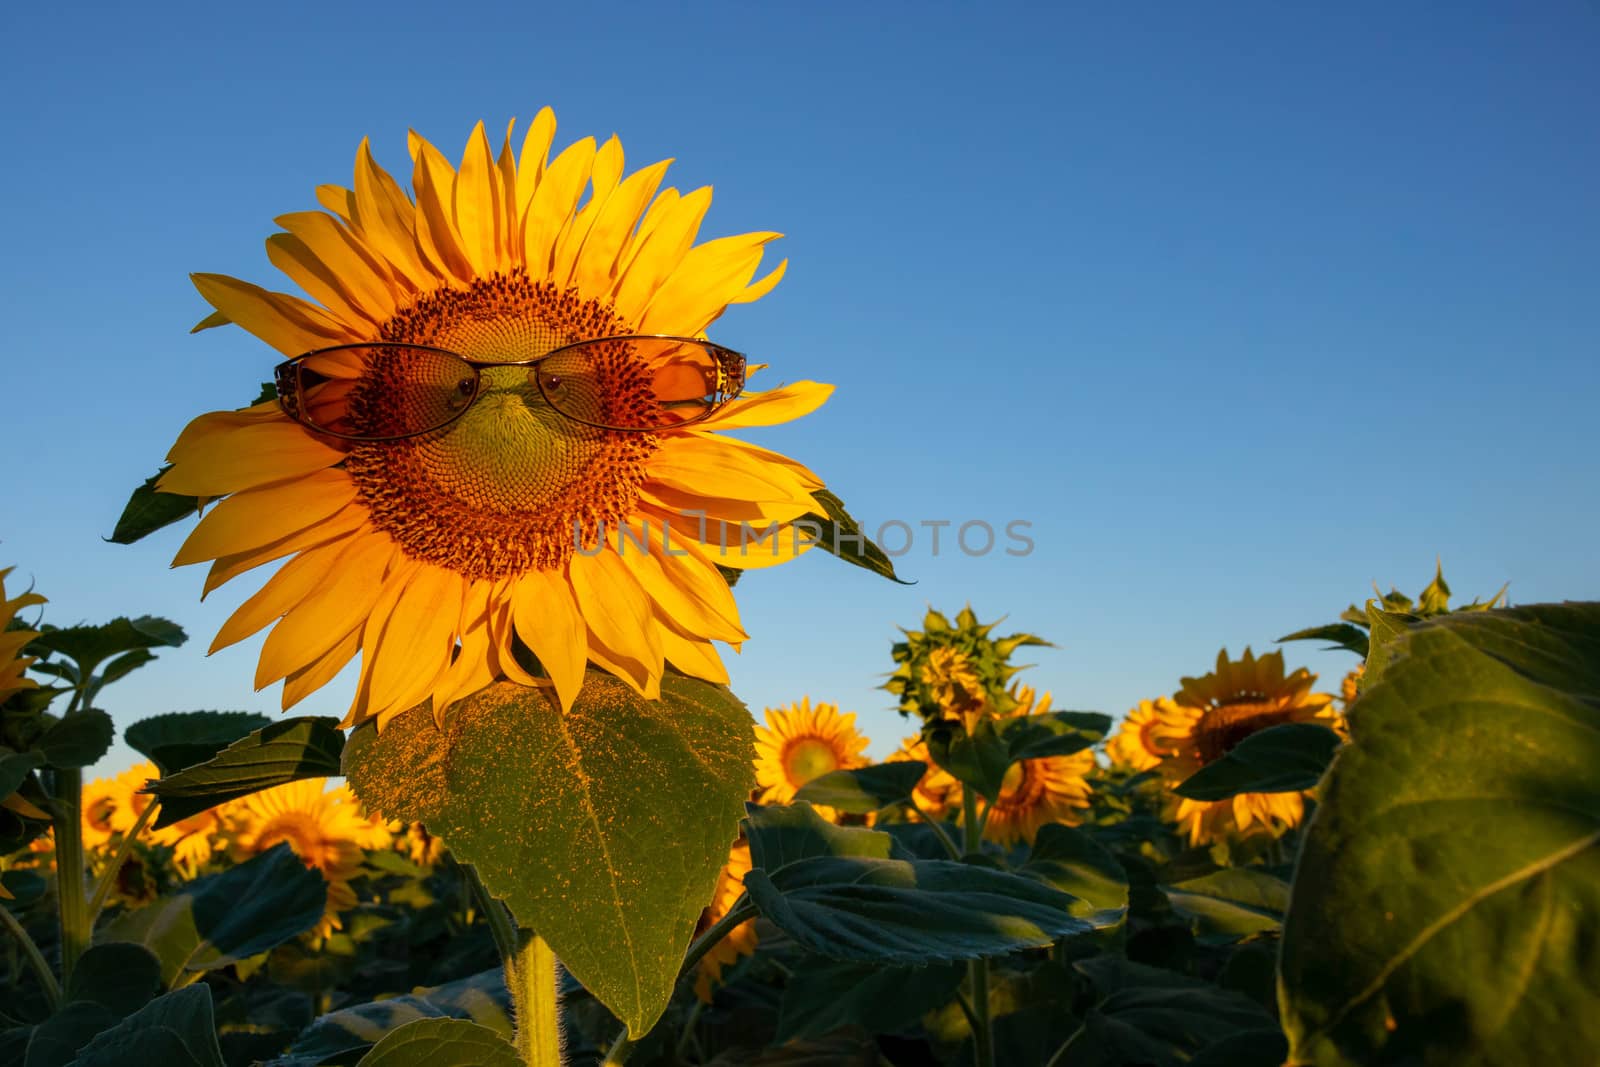 Sunflower with glasses on a blue sky background. by lapushka62